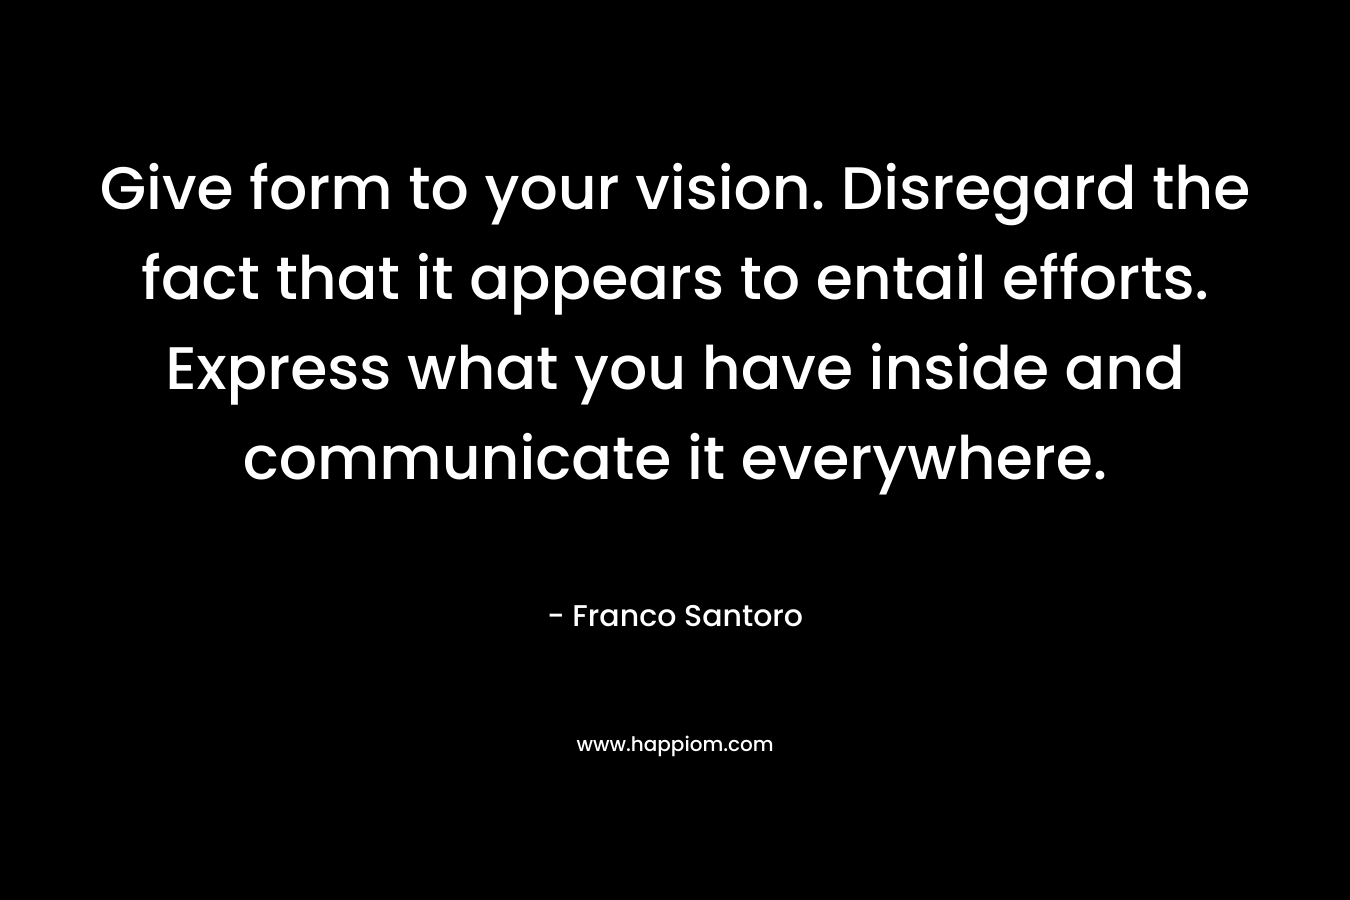 Give form to your vision. Disregard the fact that it appears to entail efforts. Express what you have inside and communicate it everywhere. – Franco Santoro